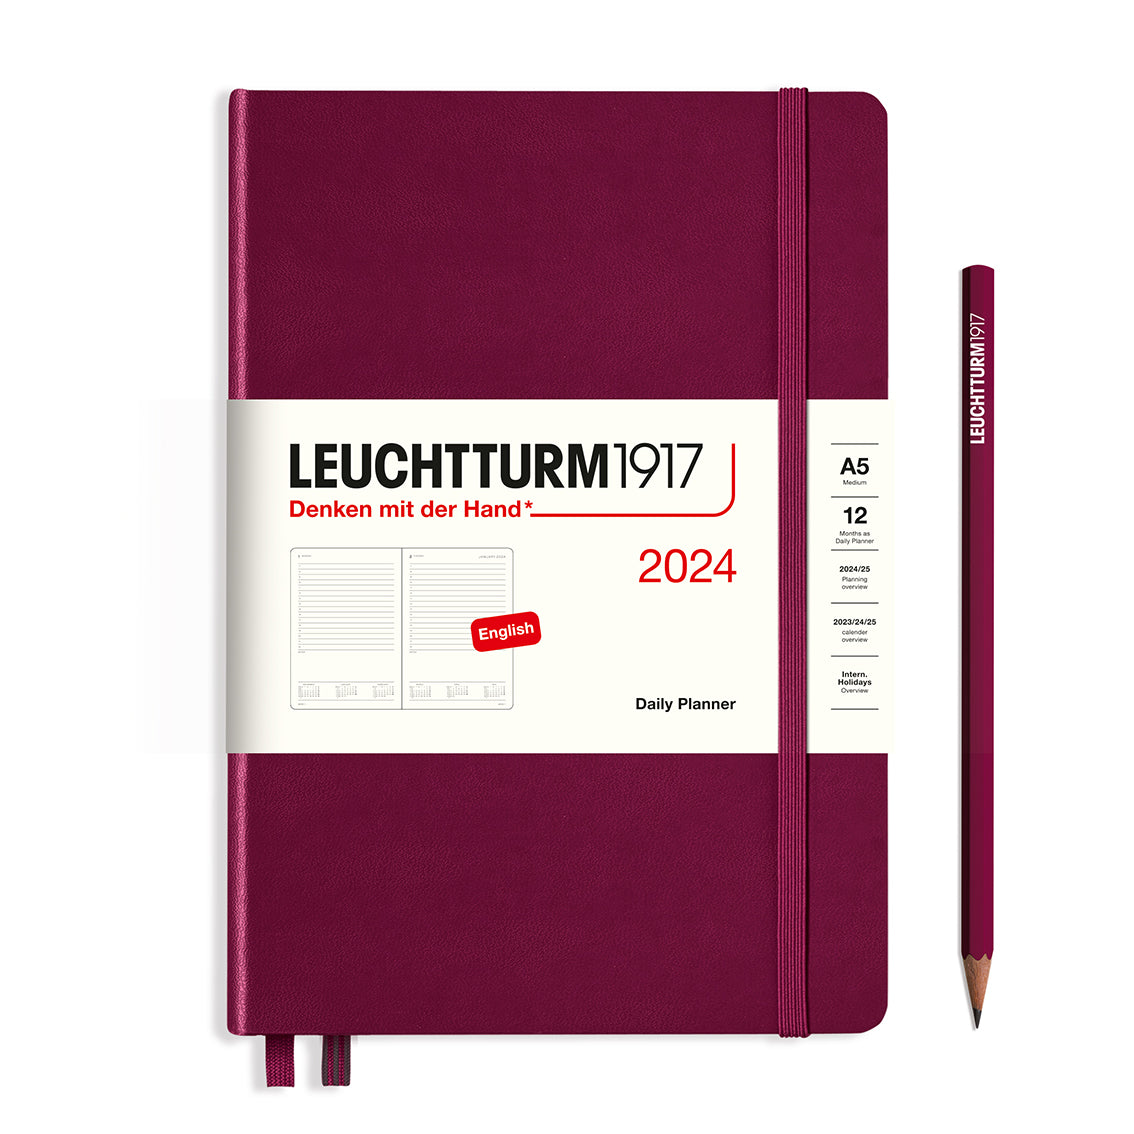 An image of a port red planner with a port red elastic band holding it together and a cream paper wrap around the middle stating the business name Leuchtturm1917, that it is for the year 2024, it is a daily planner, is A5 in size and an English language version. It has an image on the wrap showing the inside layout which is 1 day per page. A port red pencil is shown at the side of the planner.